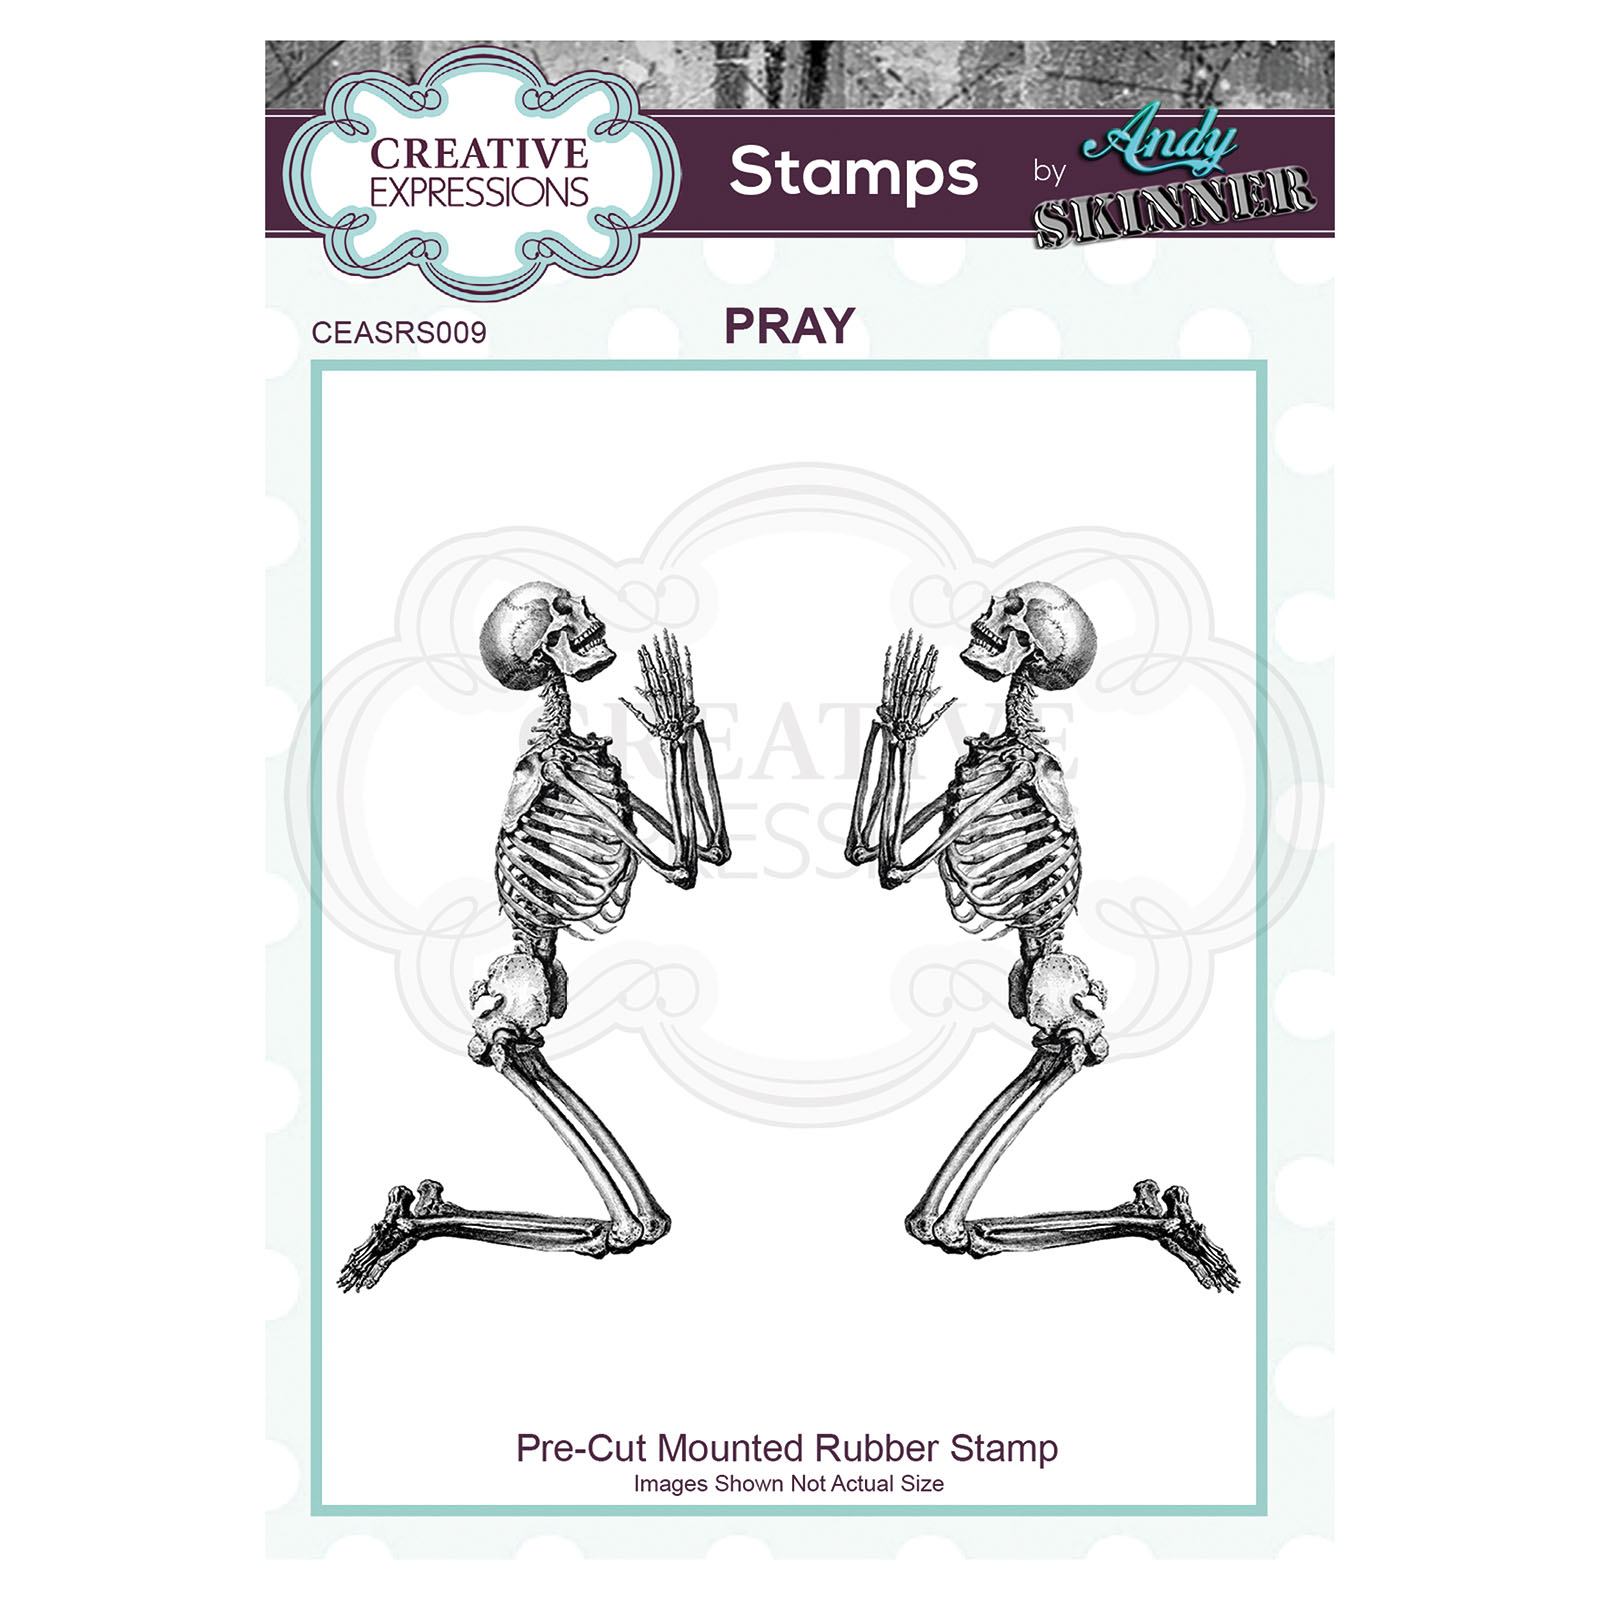 Creative Expressions • Pre Cut Rubber Stamp Andy Skinner Pray